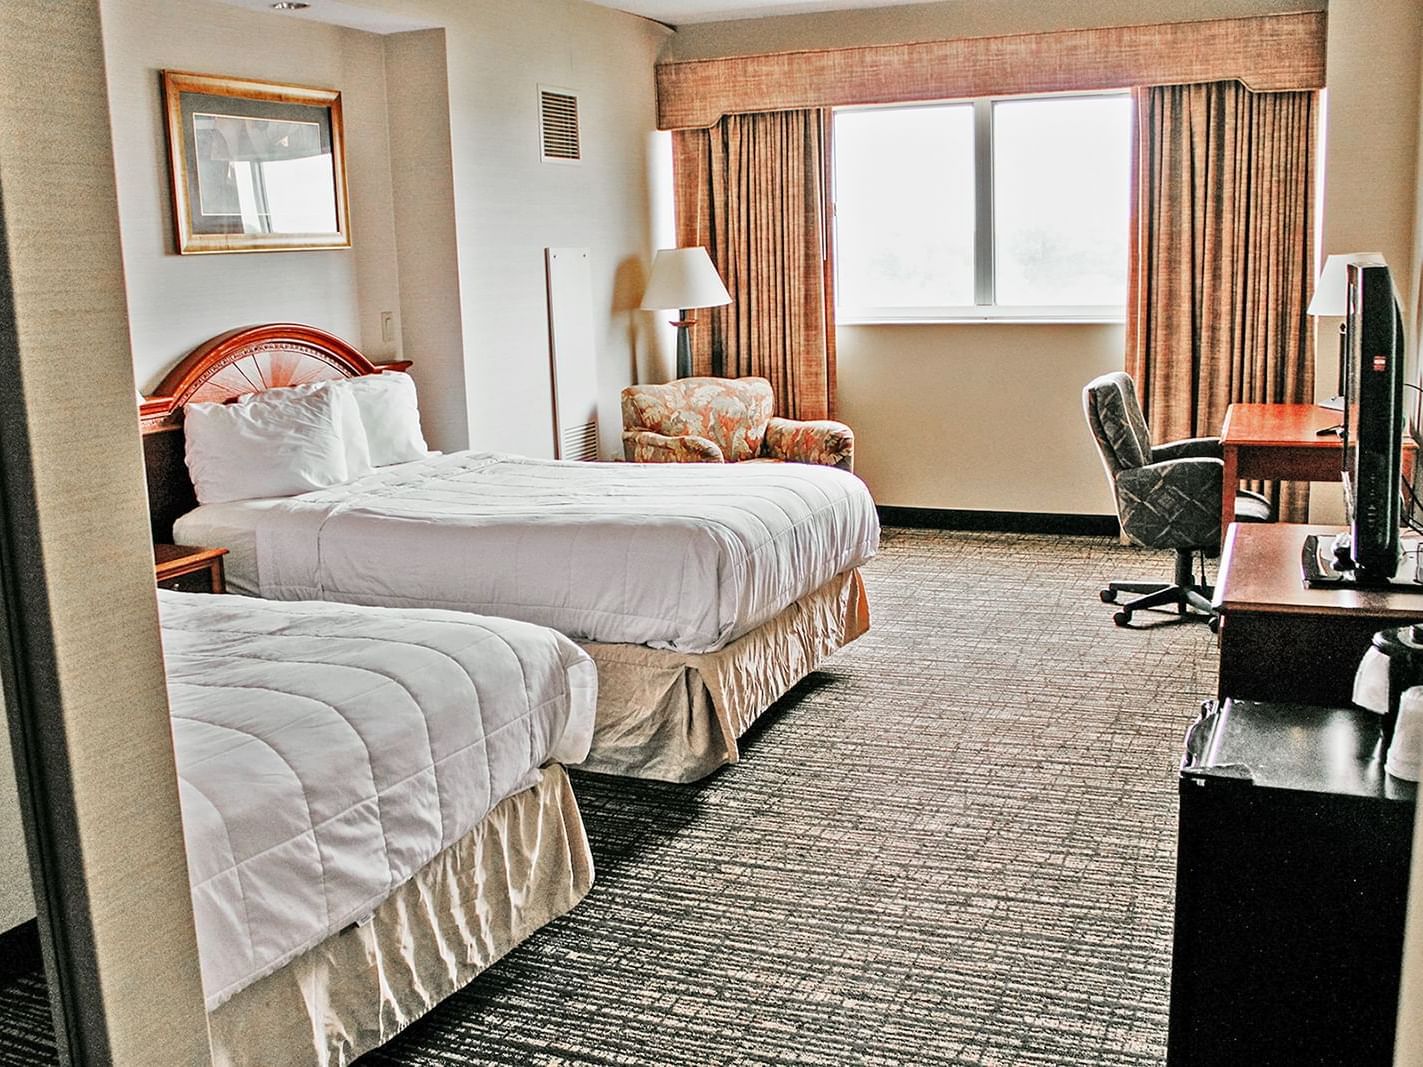 Double guest room equipped with two full size beds, standard amenities, and a refrigerator.